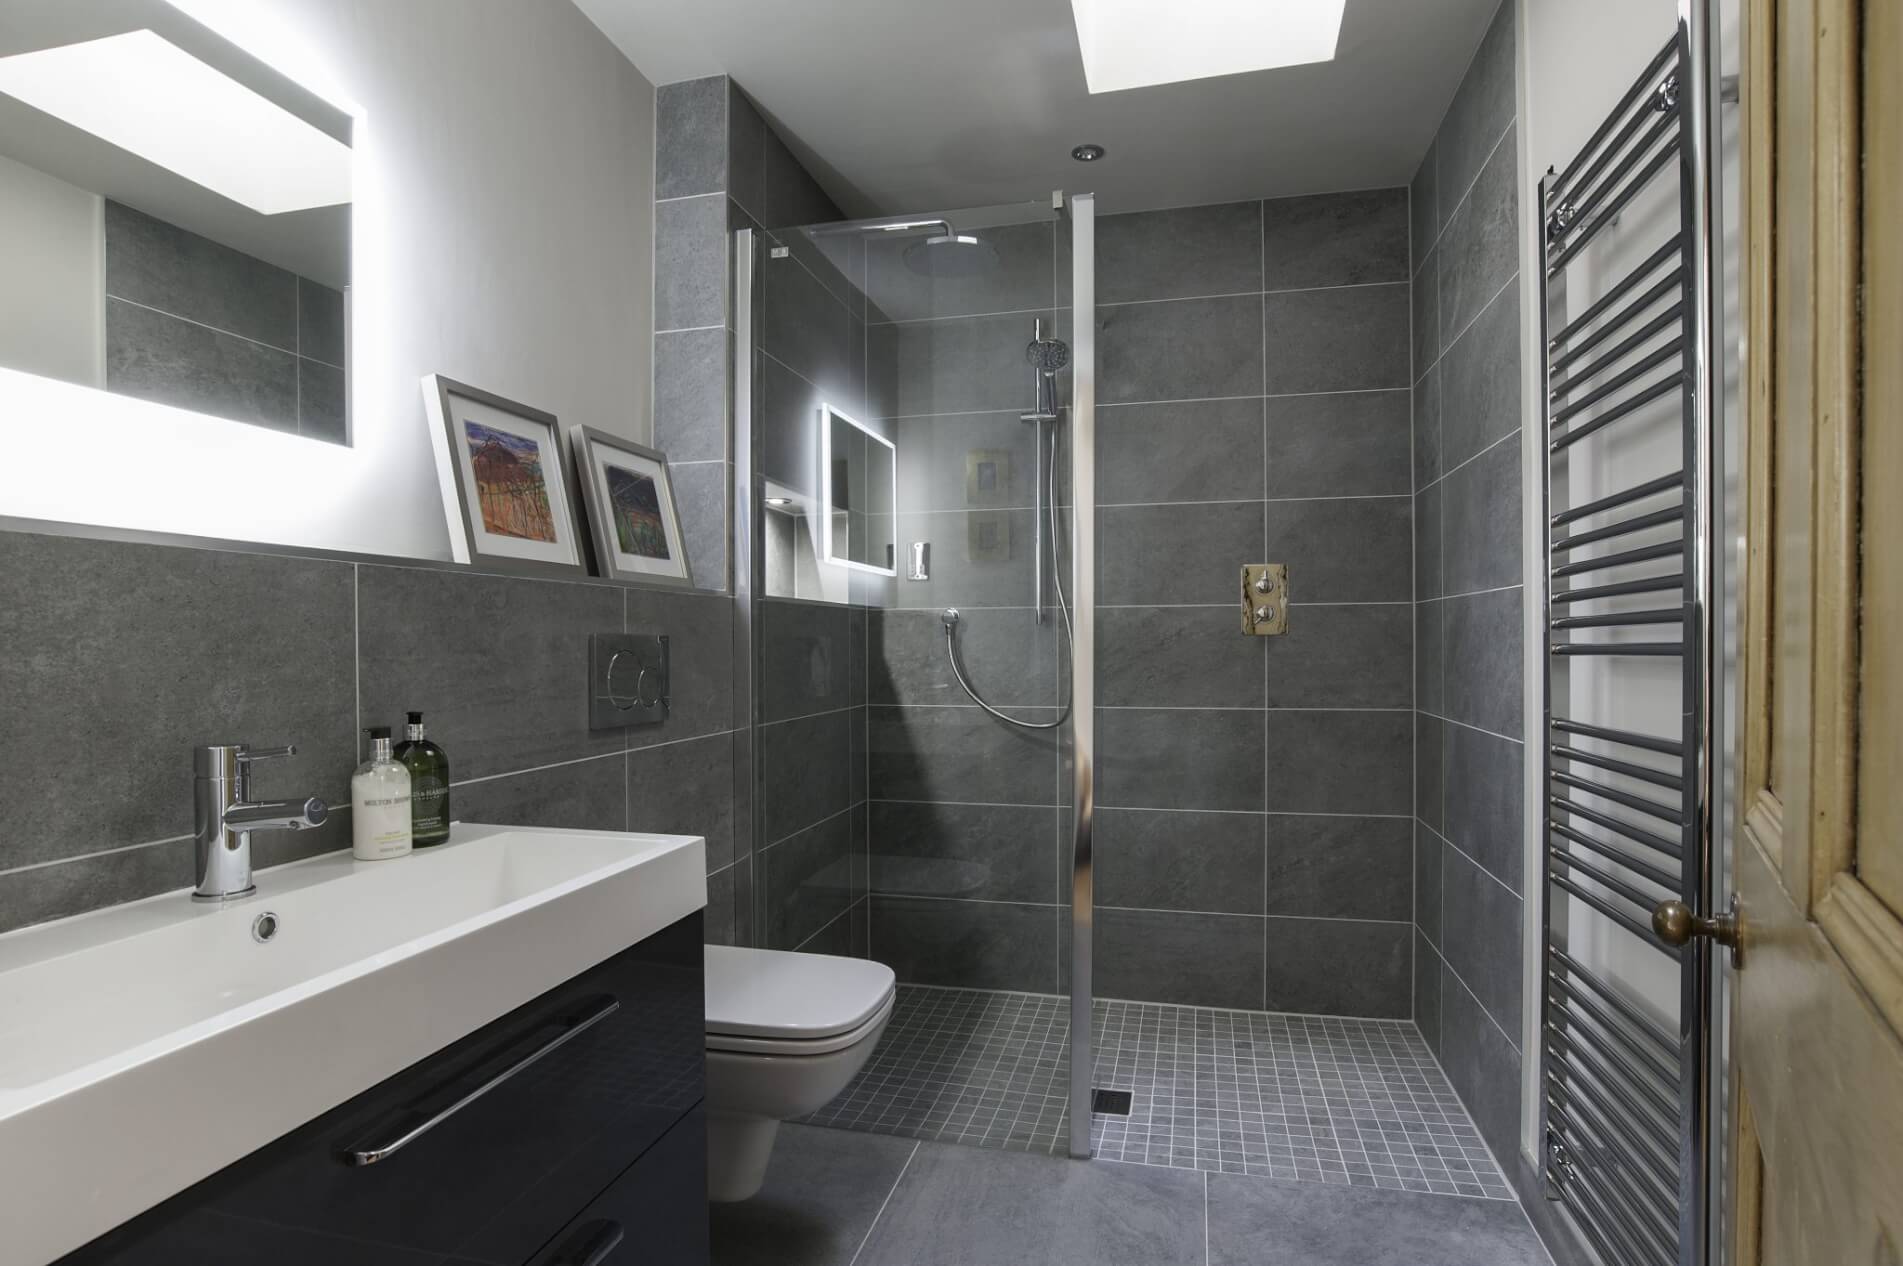 The importance of tile maintenance in mobility focussed bathrooms